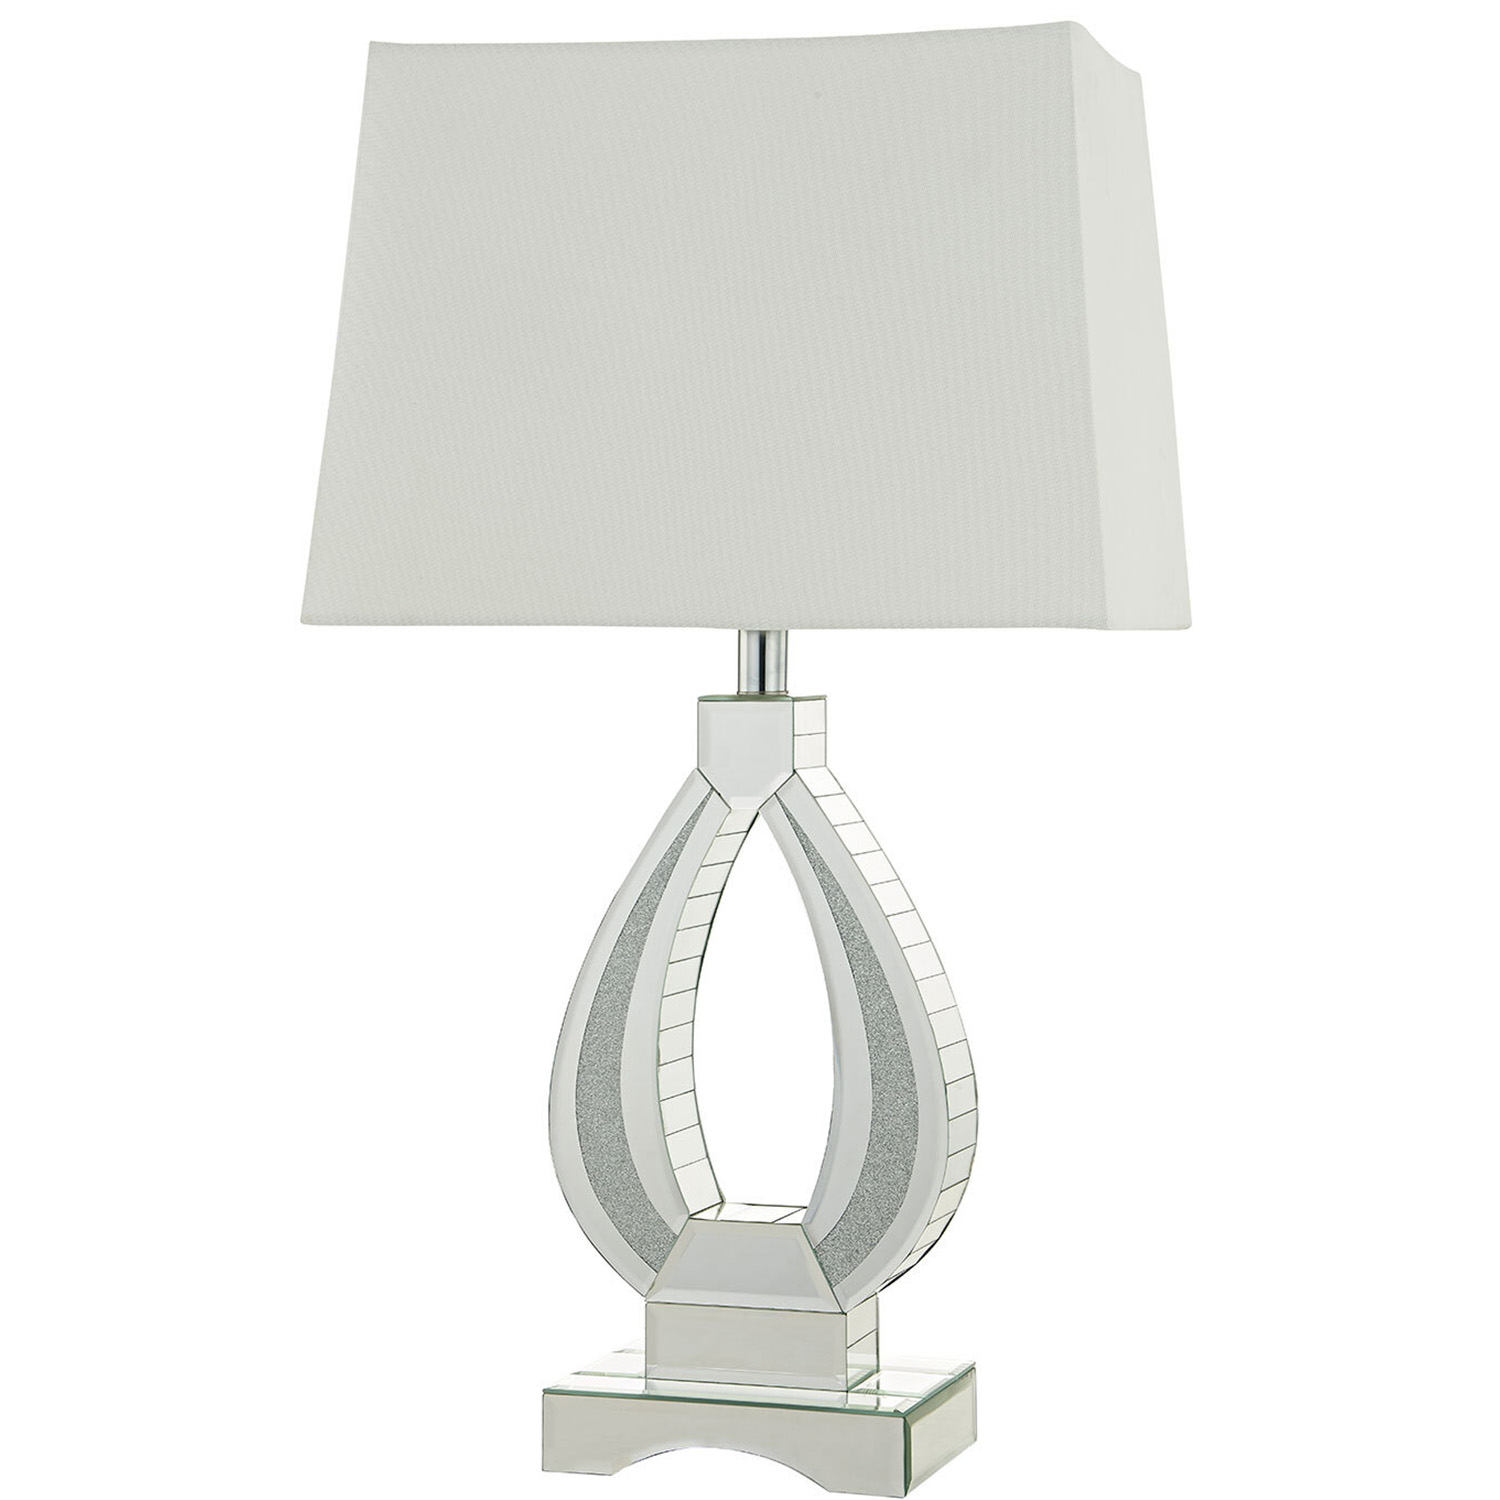 Eternity White Oval Crystal Encased Table Lamp Image 1